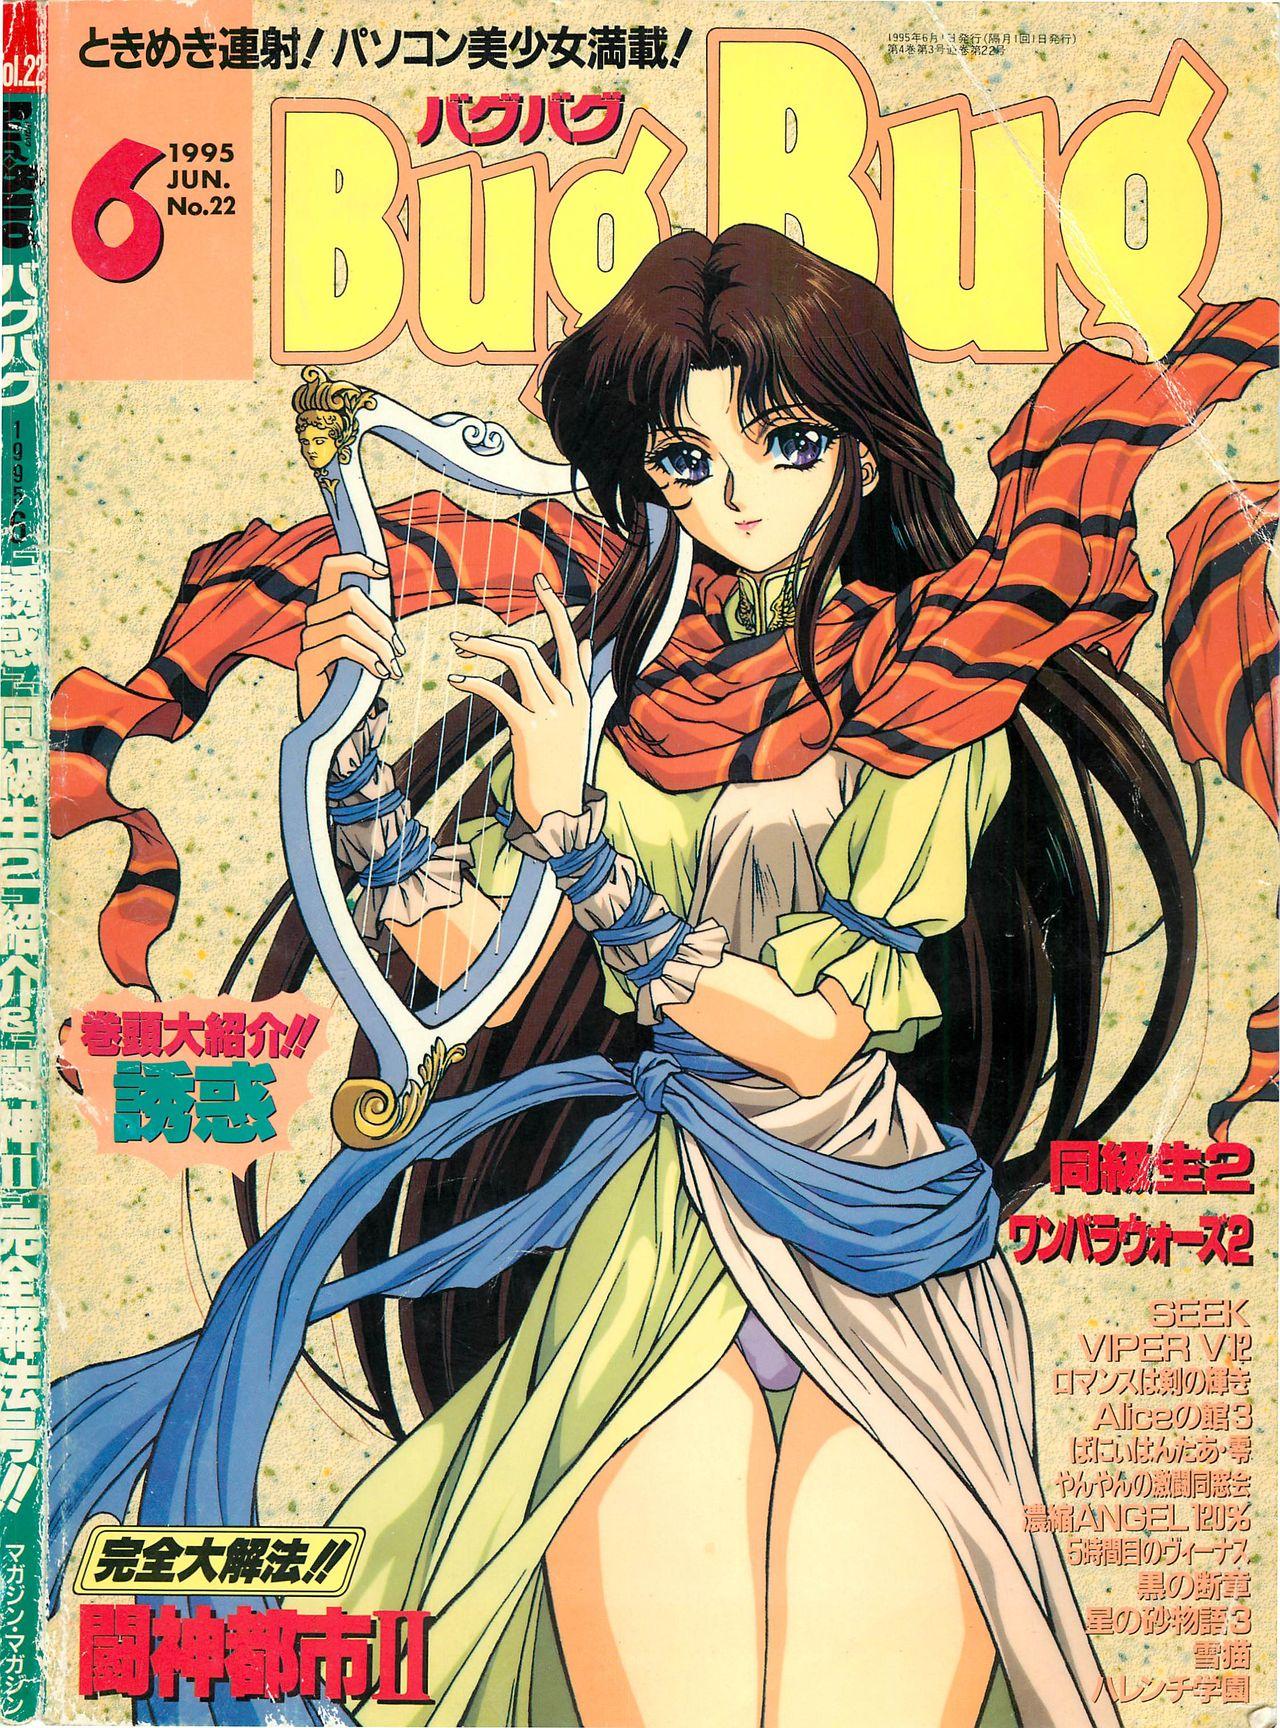 Cut BugBug 1995-06 Hot Couple Sex - Picture 1